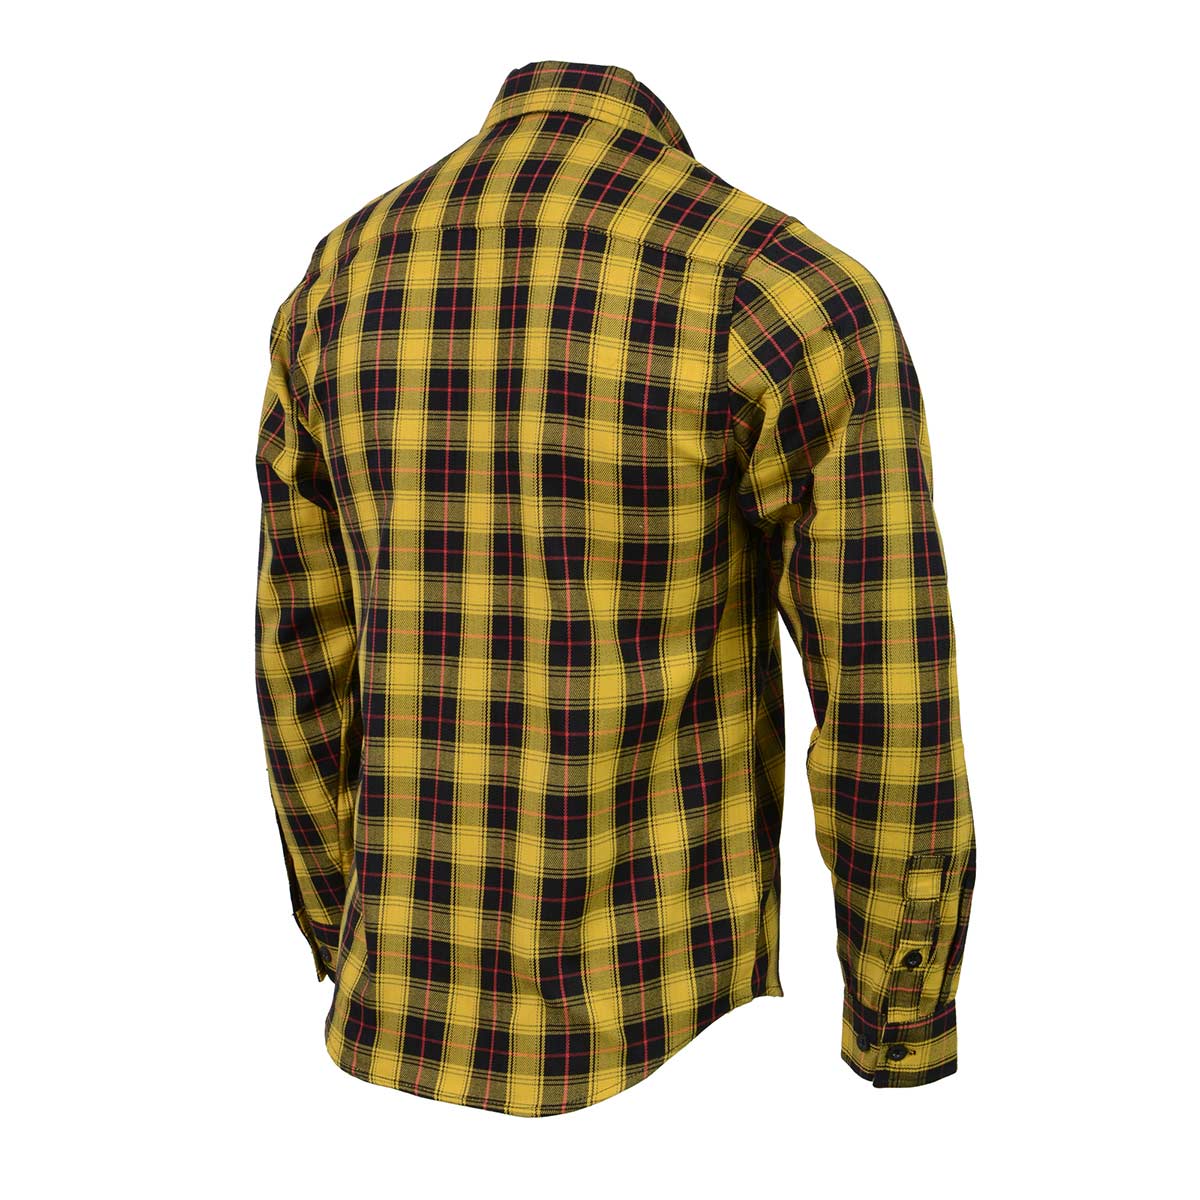 Men's Black and Red with Yellow Long Sleeve Cotton Flannel Shirt